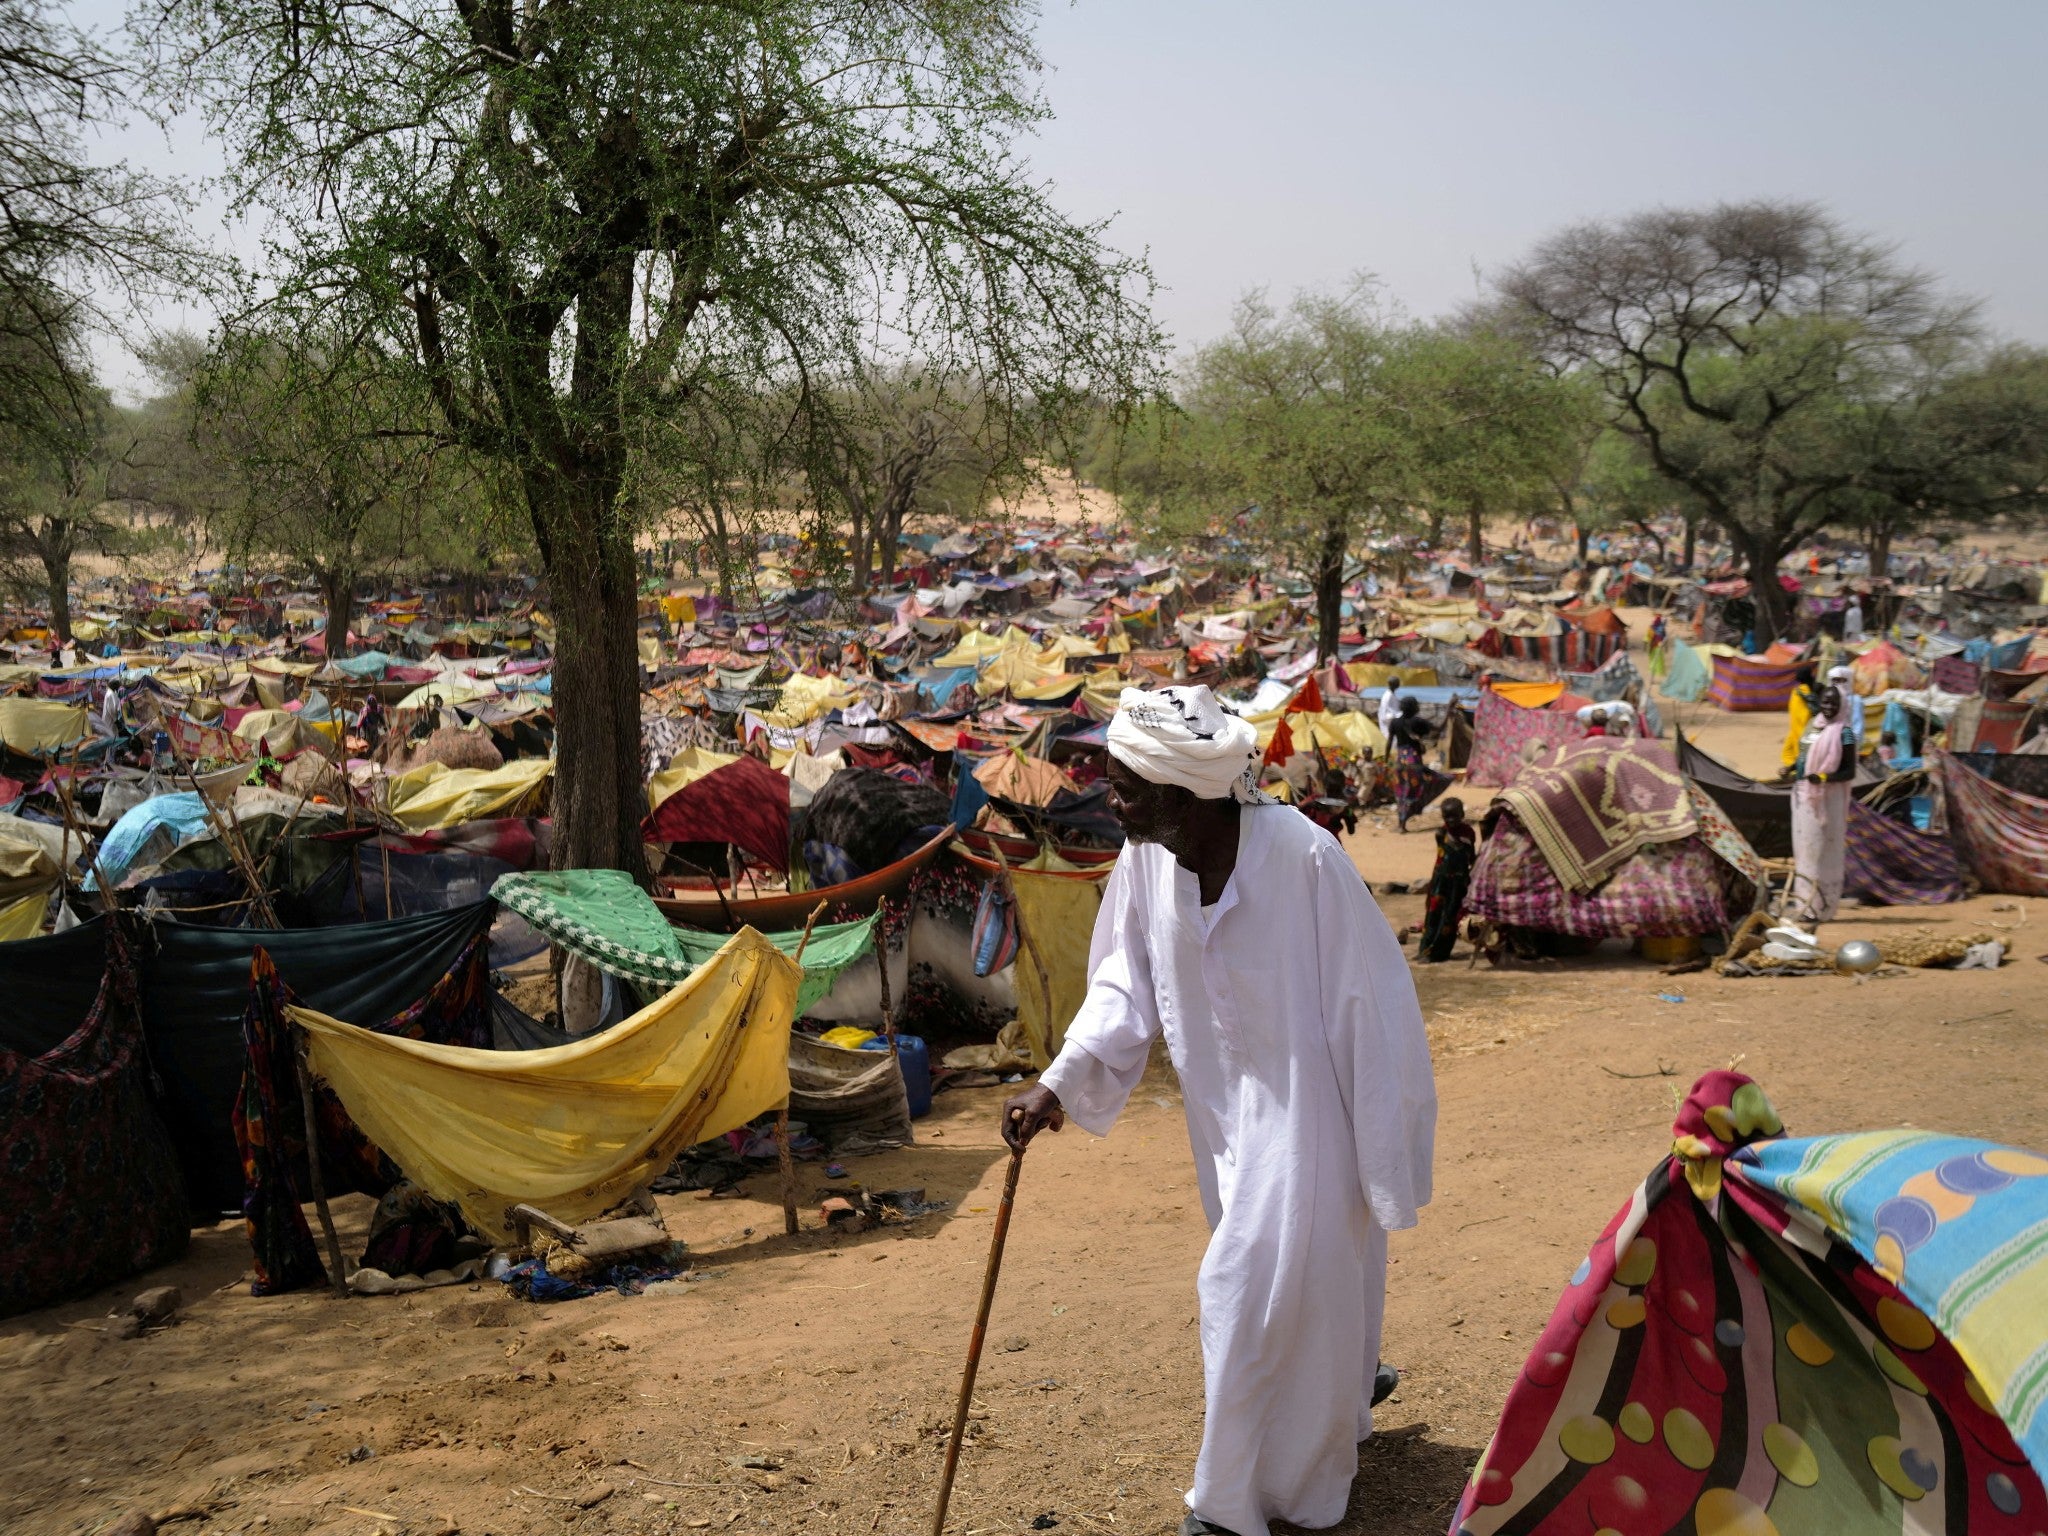 A camp for those who have fled the violence in Sudan’s Darfur region, in Borata, Chad